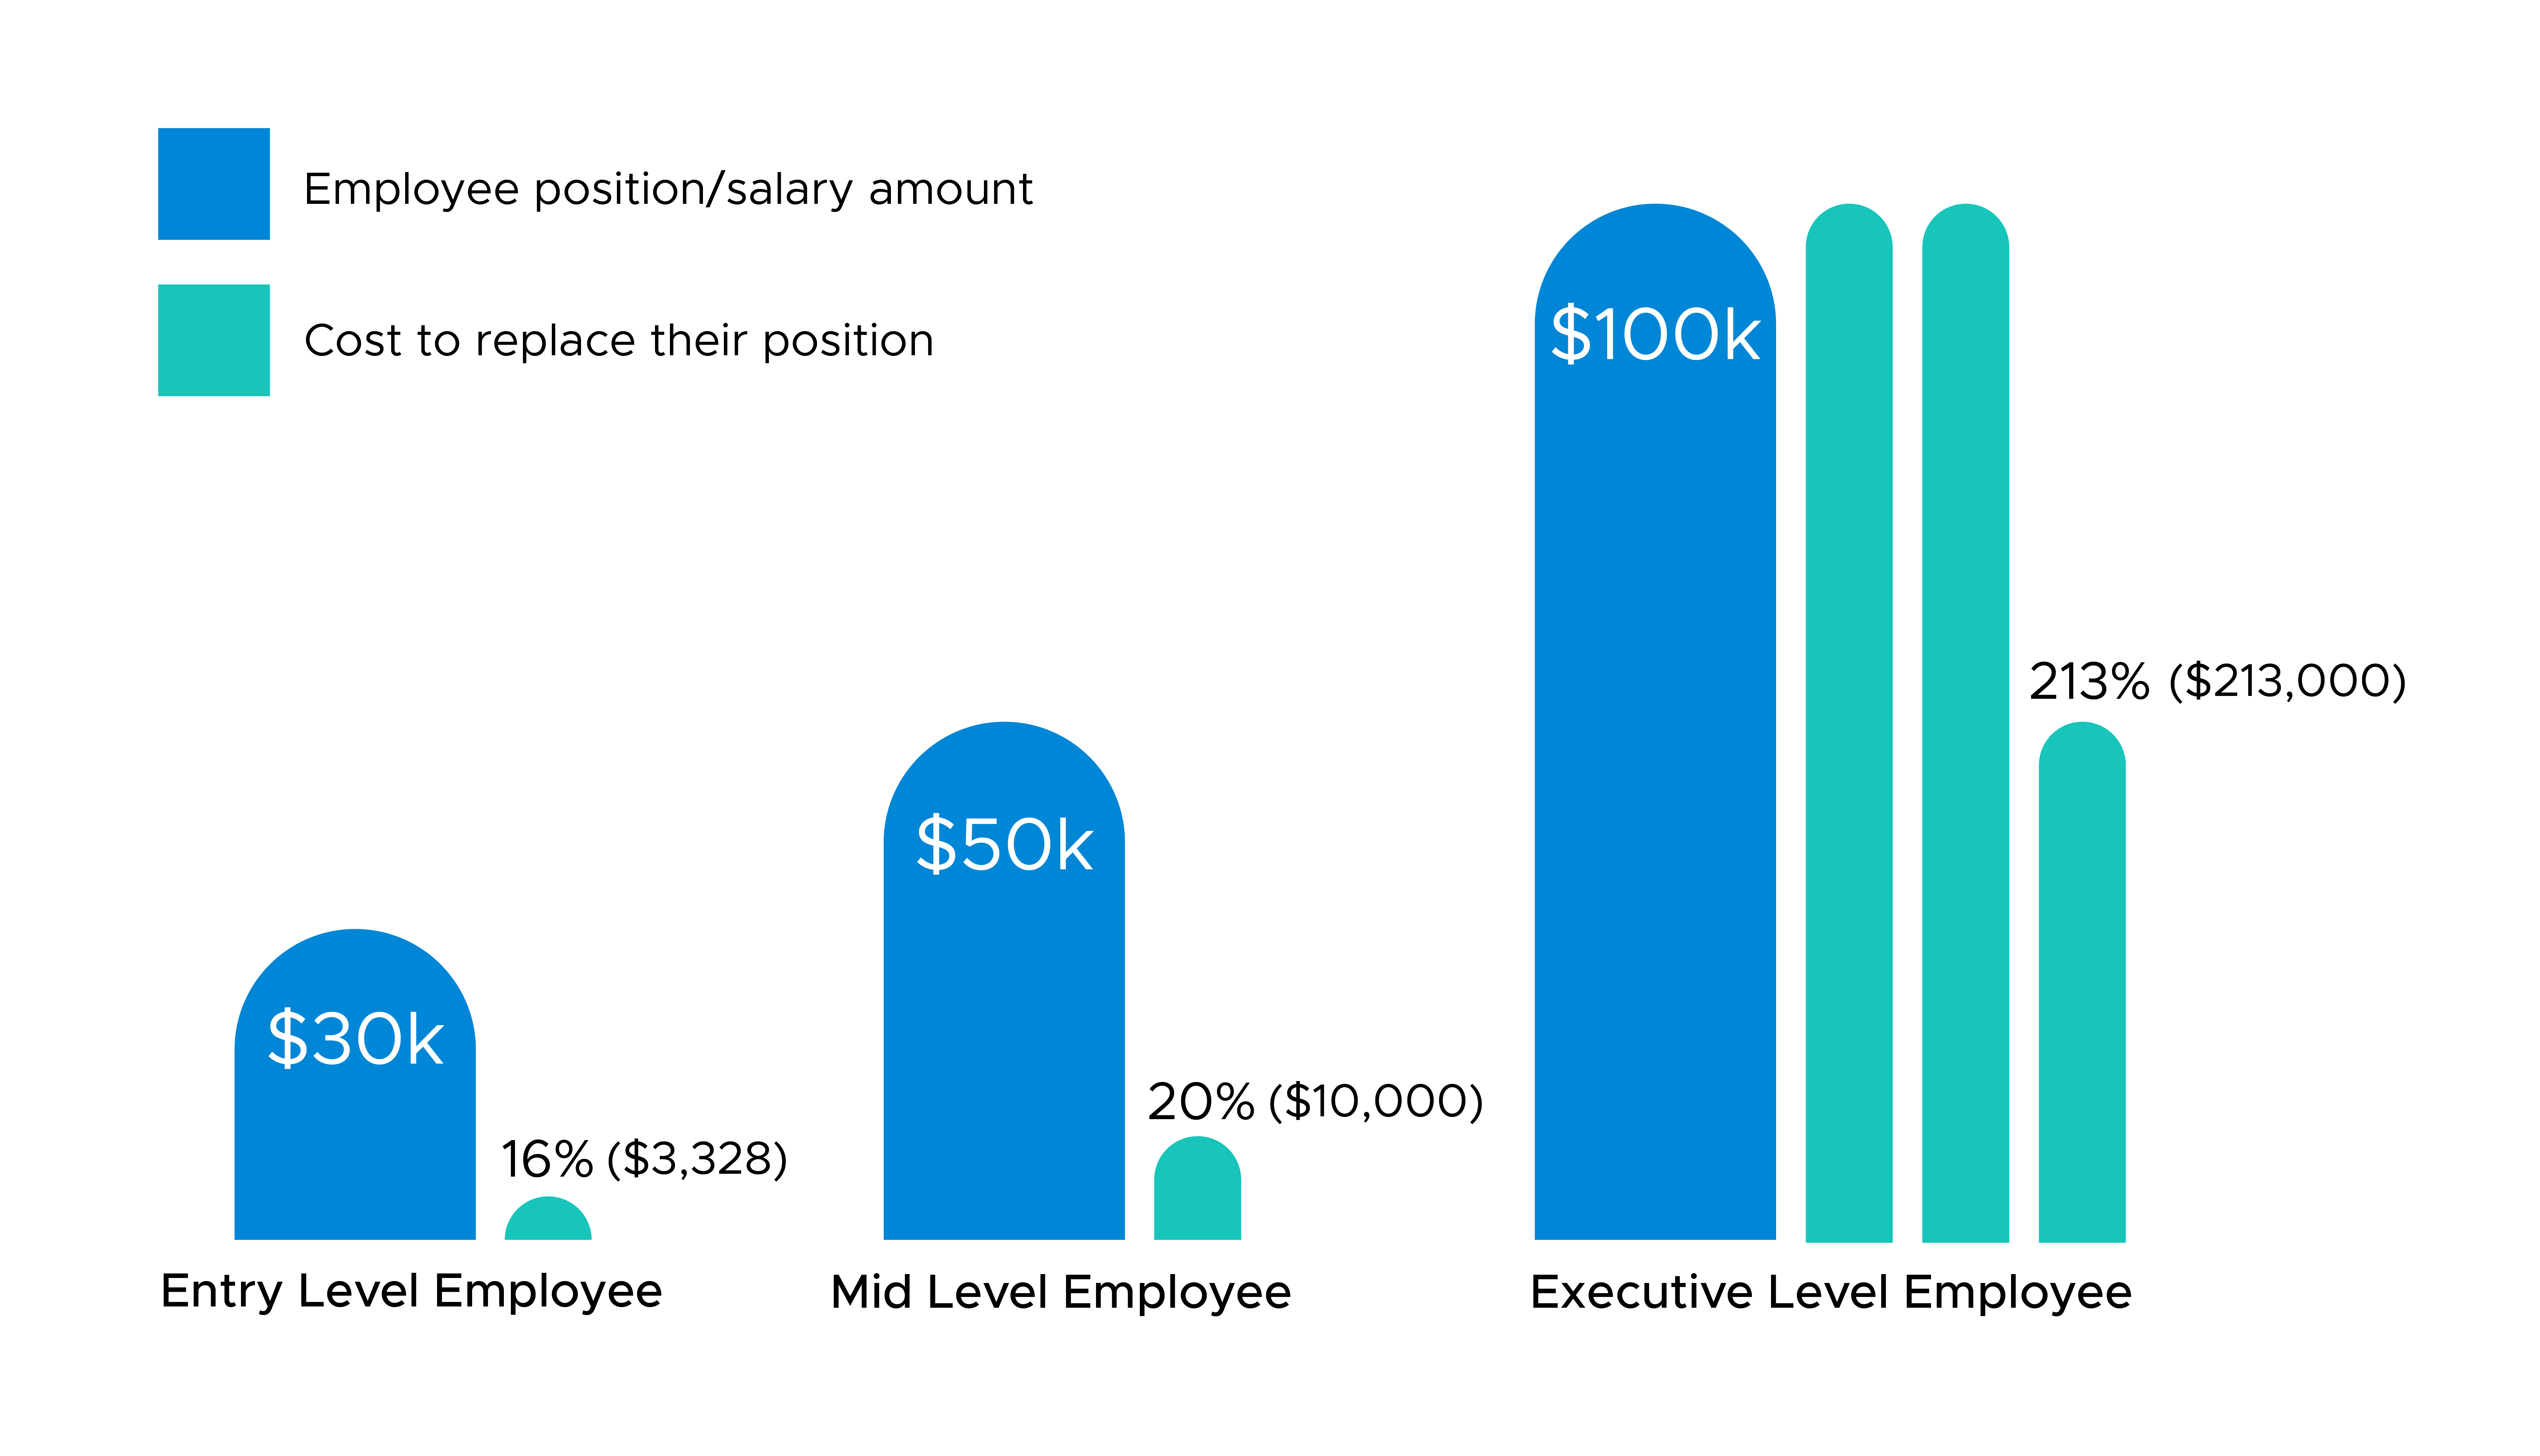 Graph showing Employee Salary amount compared to Cost to replace their position